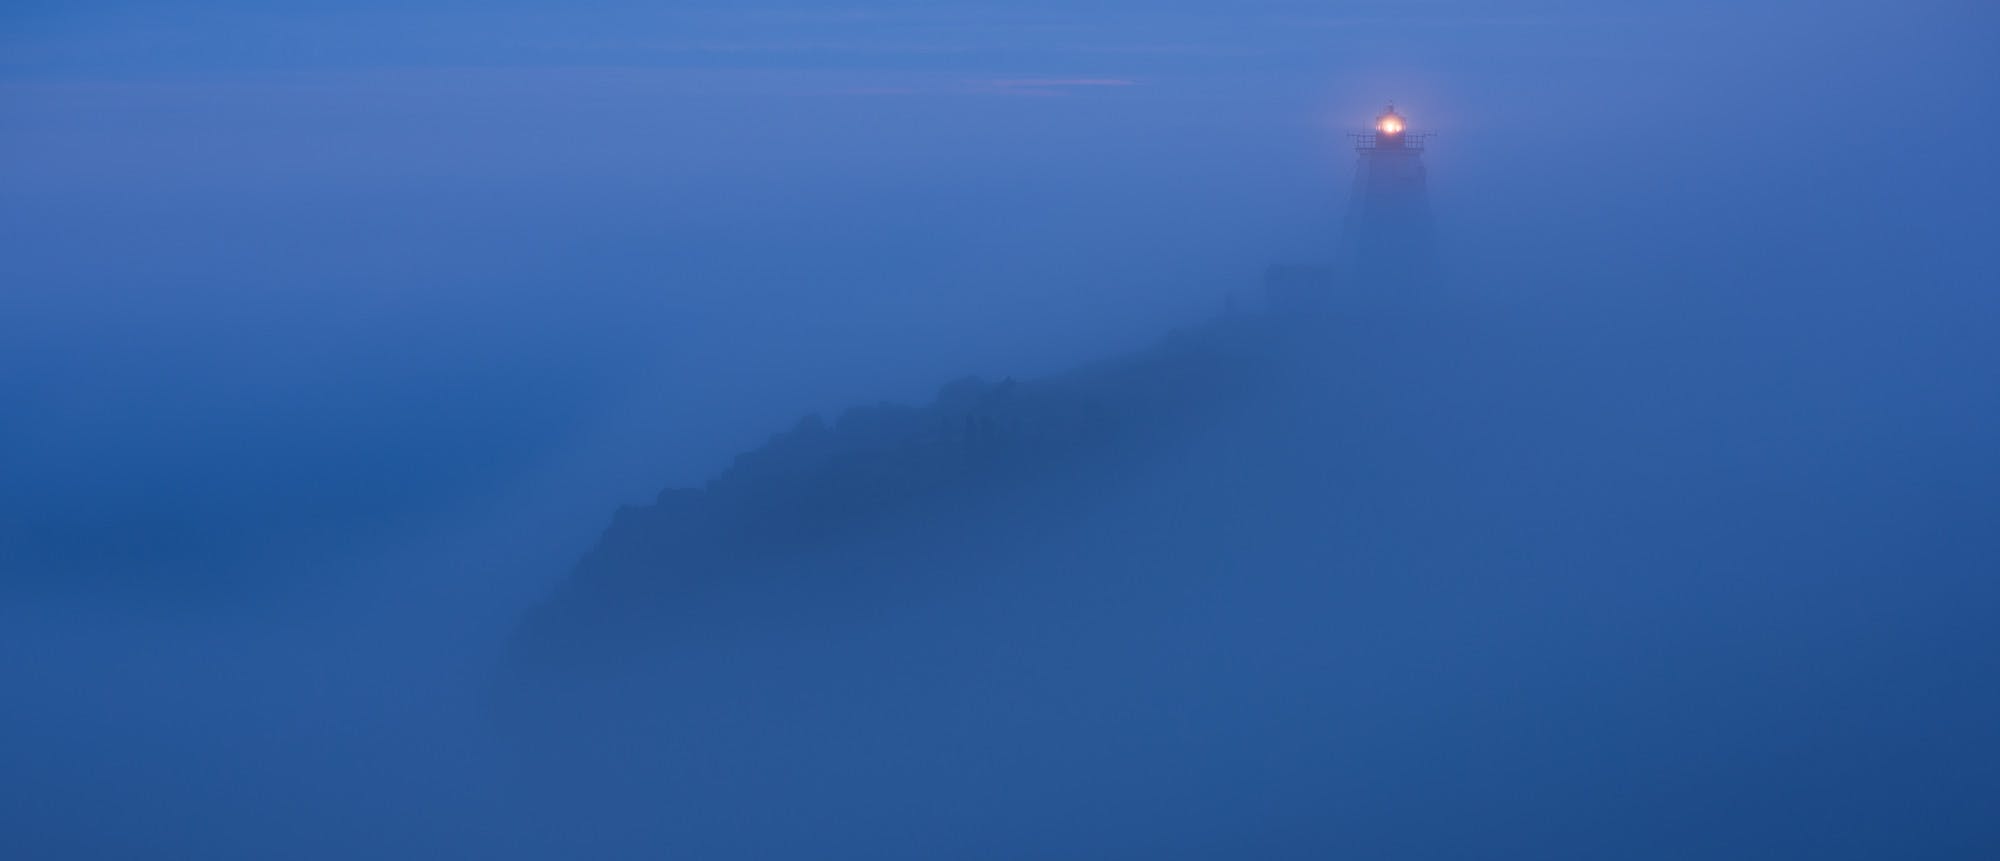 Morning Twilight Fog at Swallowtail Lighthouse